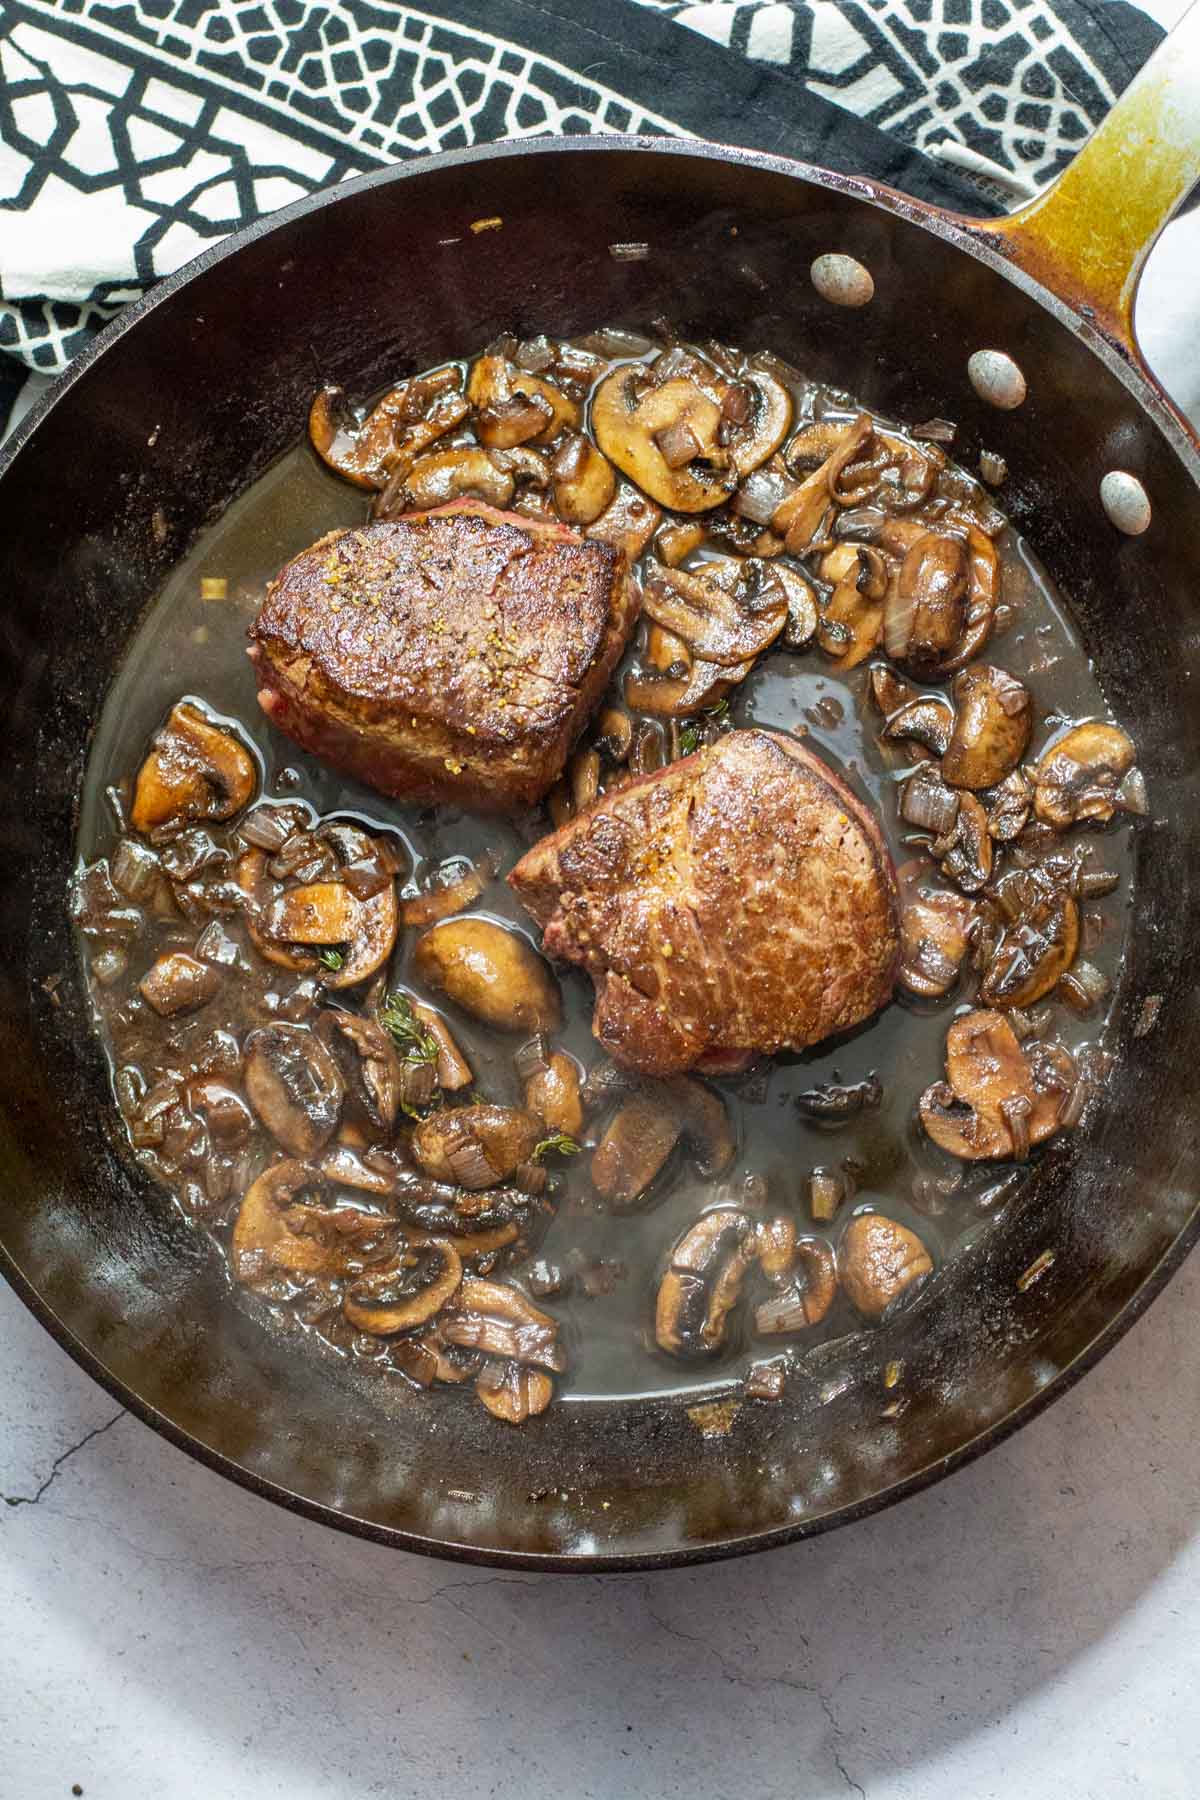 What Is Beef Tournedos?